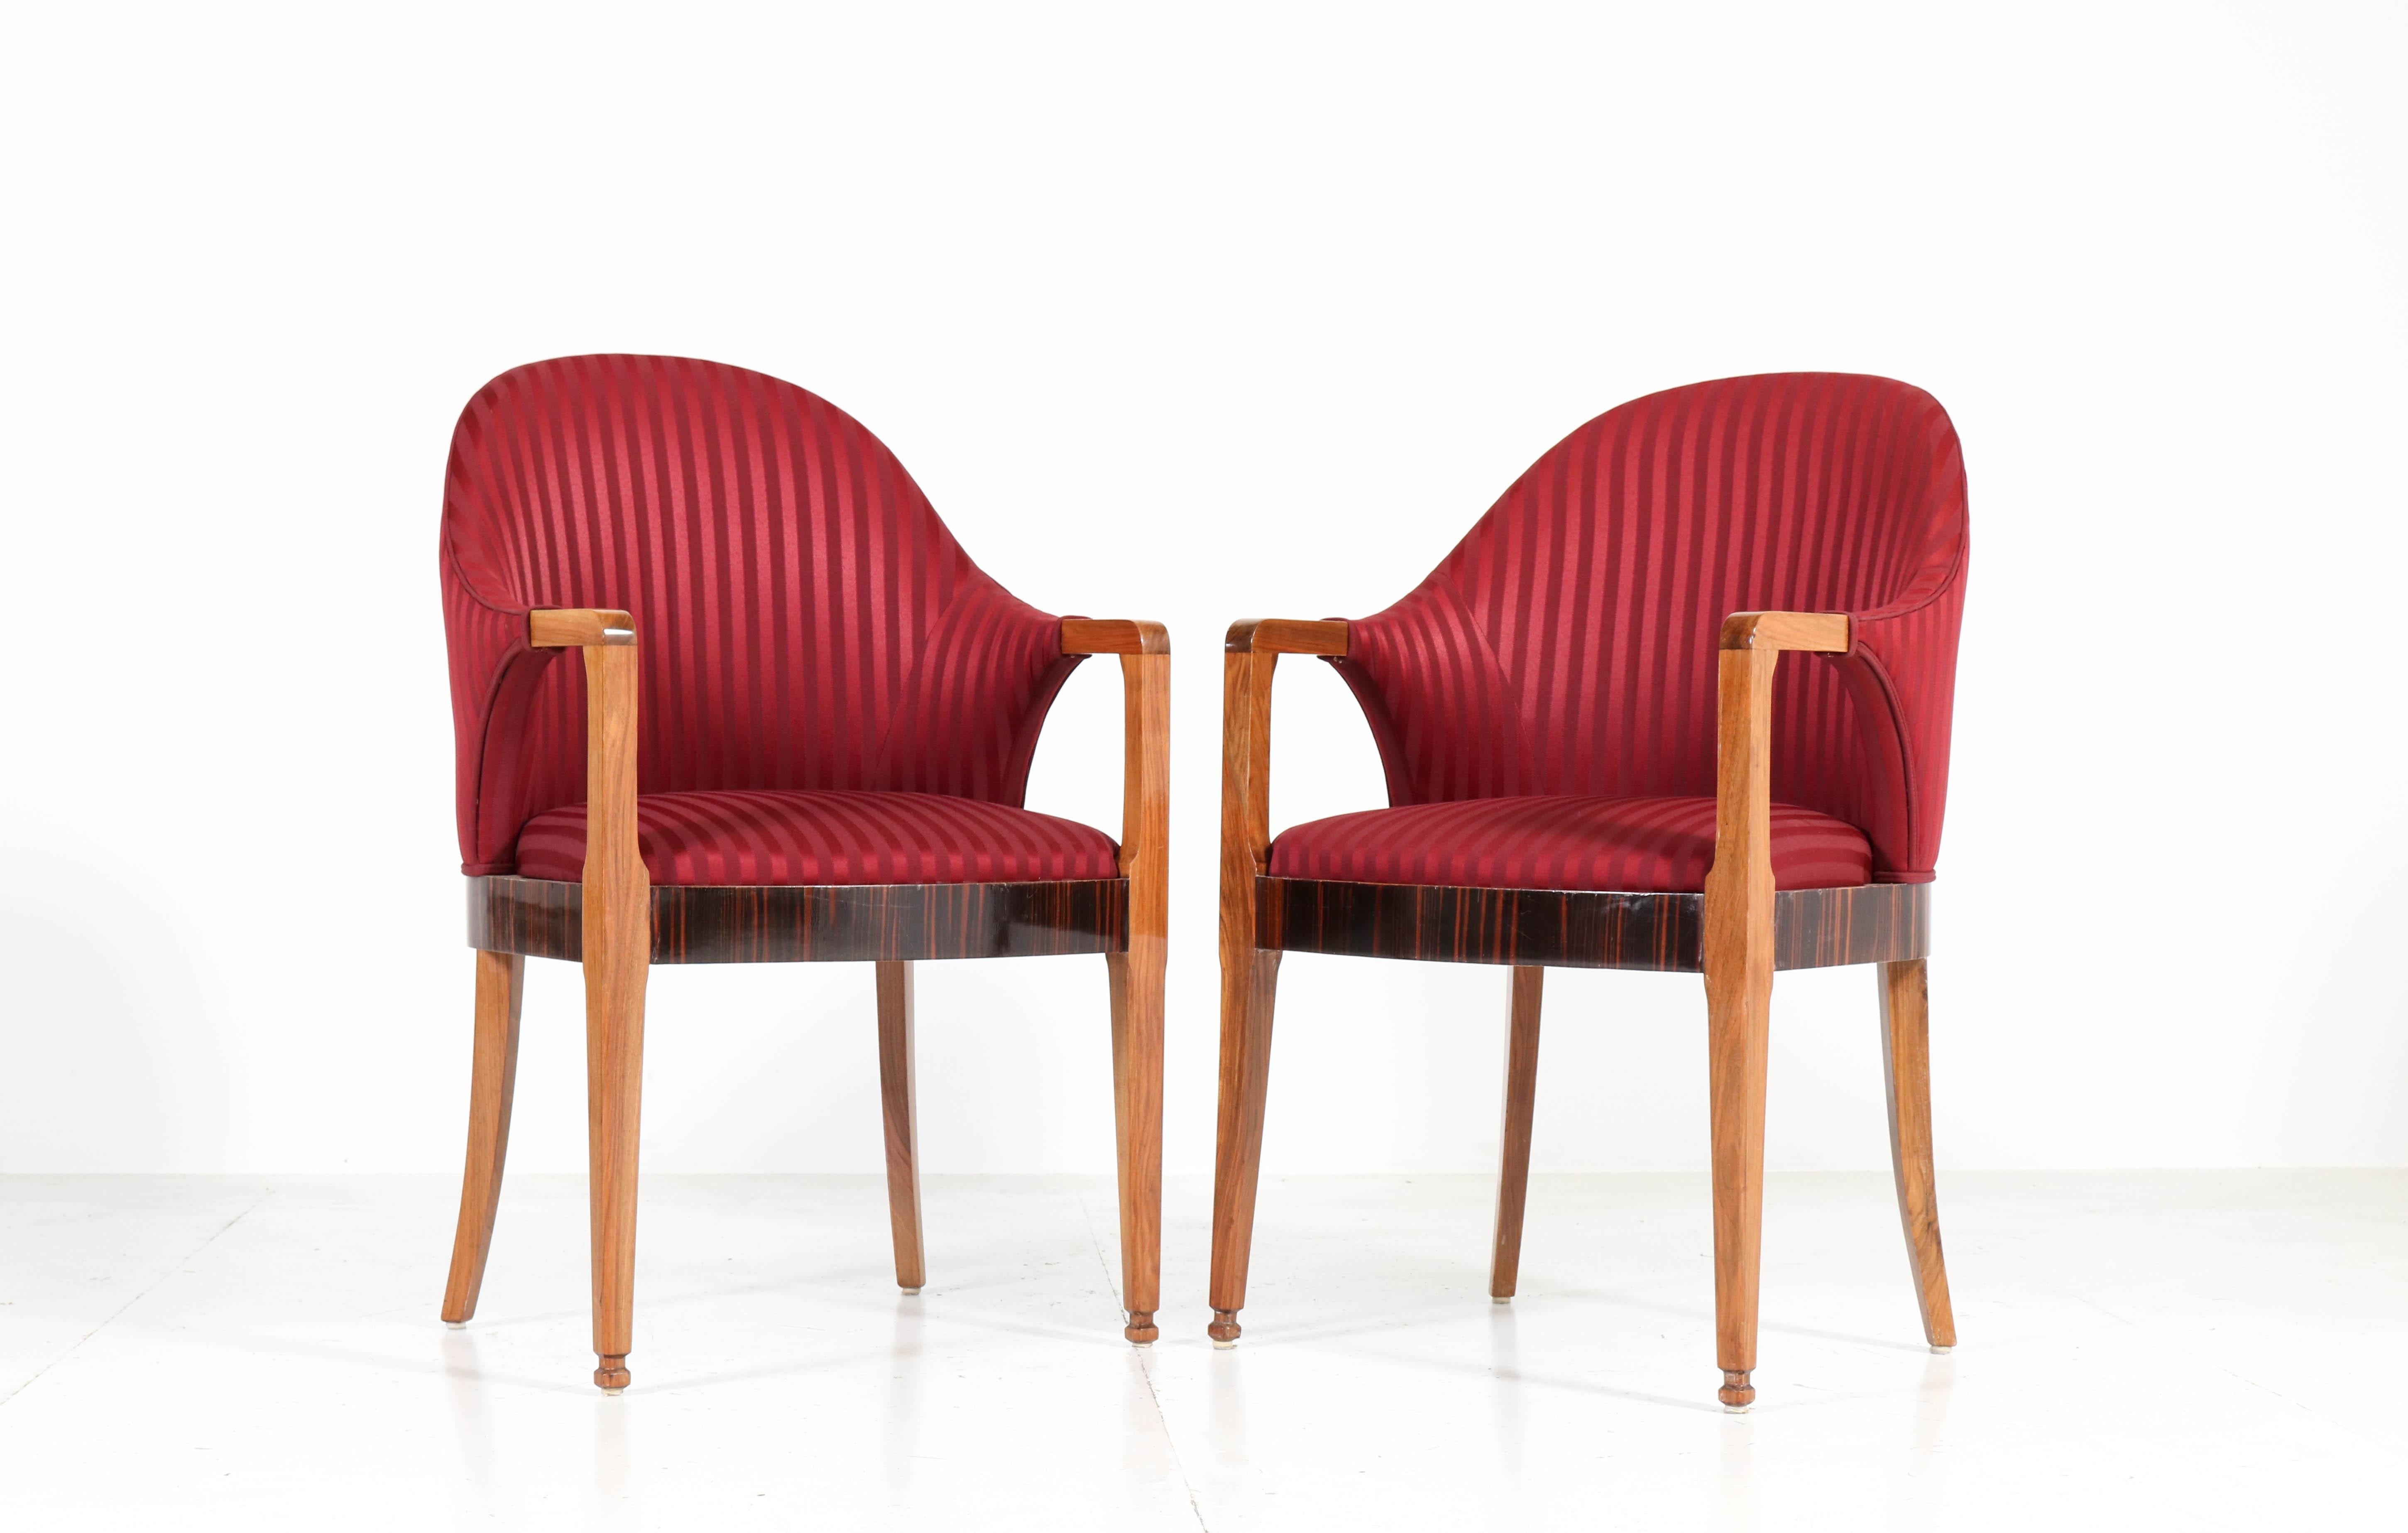 Wonderful pair of Art Deco armchairs.
Striking French design from the 1930s.
Solid walnut with ebony Makassar veneer lining.
Re-upholstered with red striped fabric.
In good original condition with minor wear consistent with age and